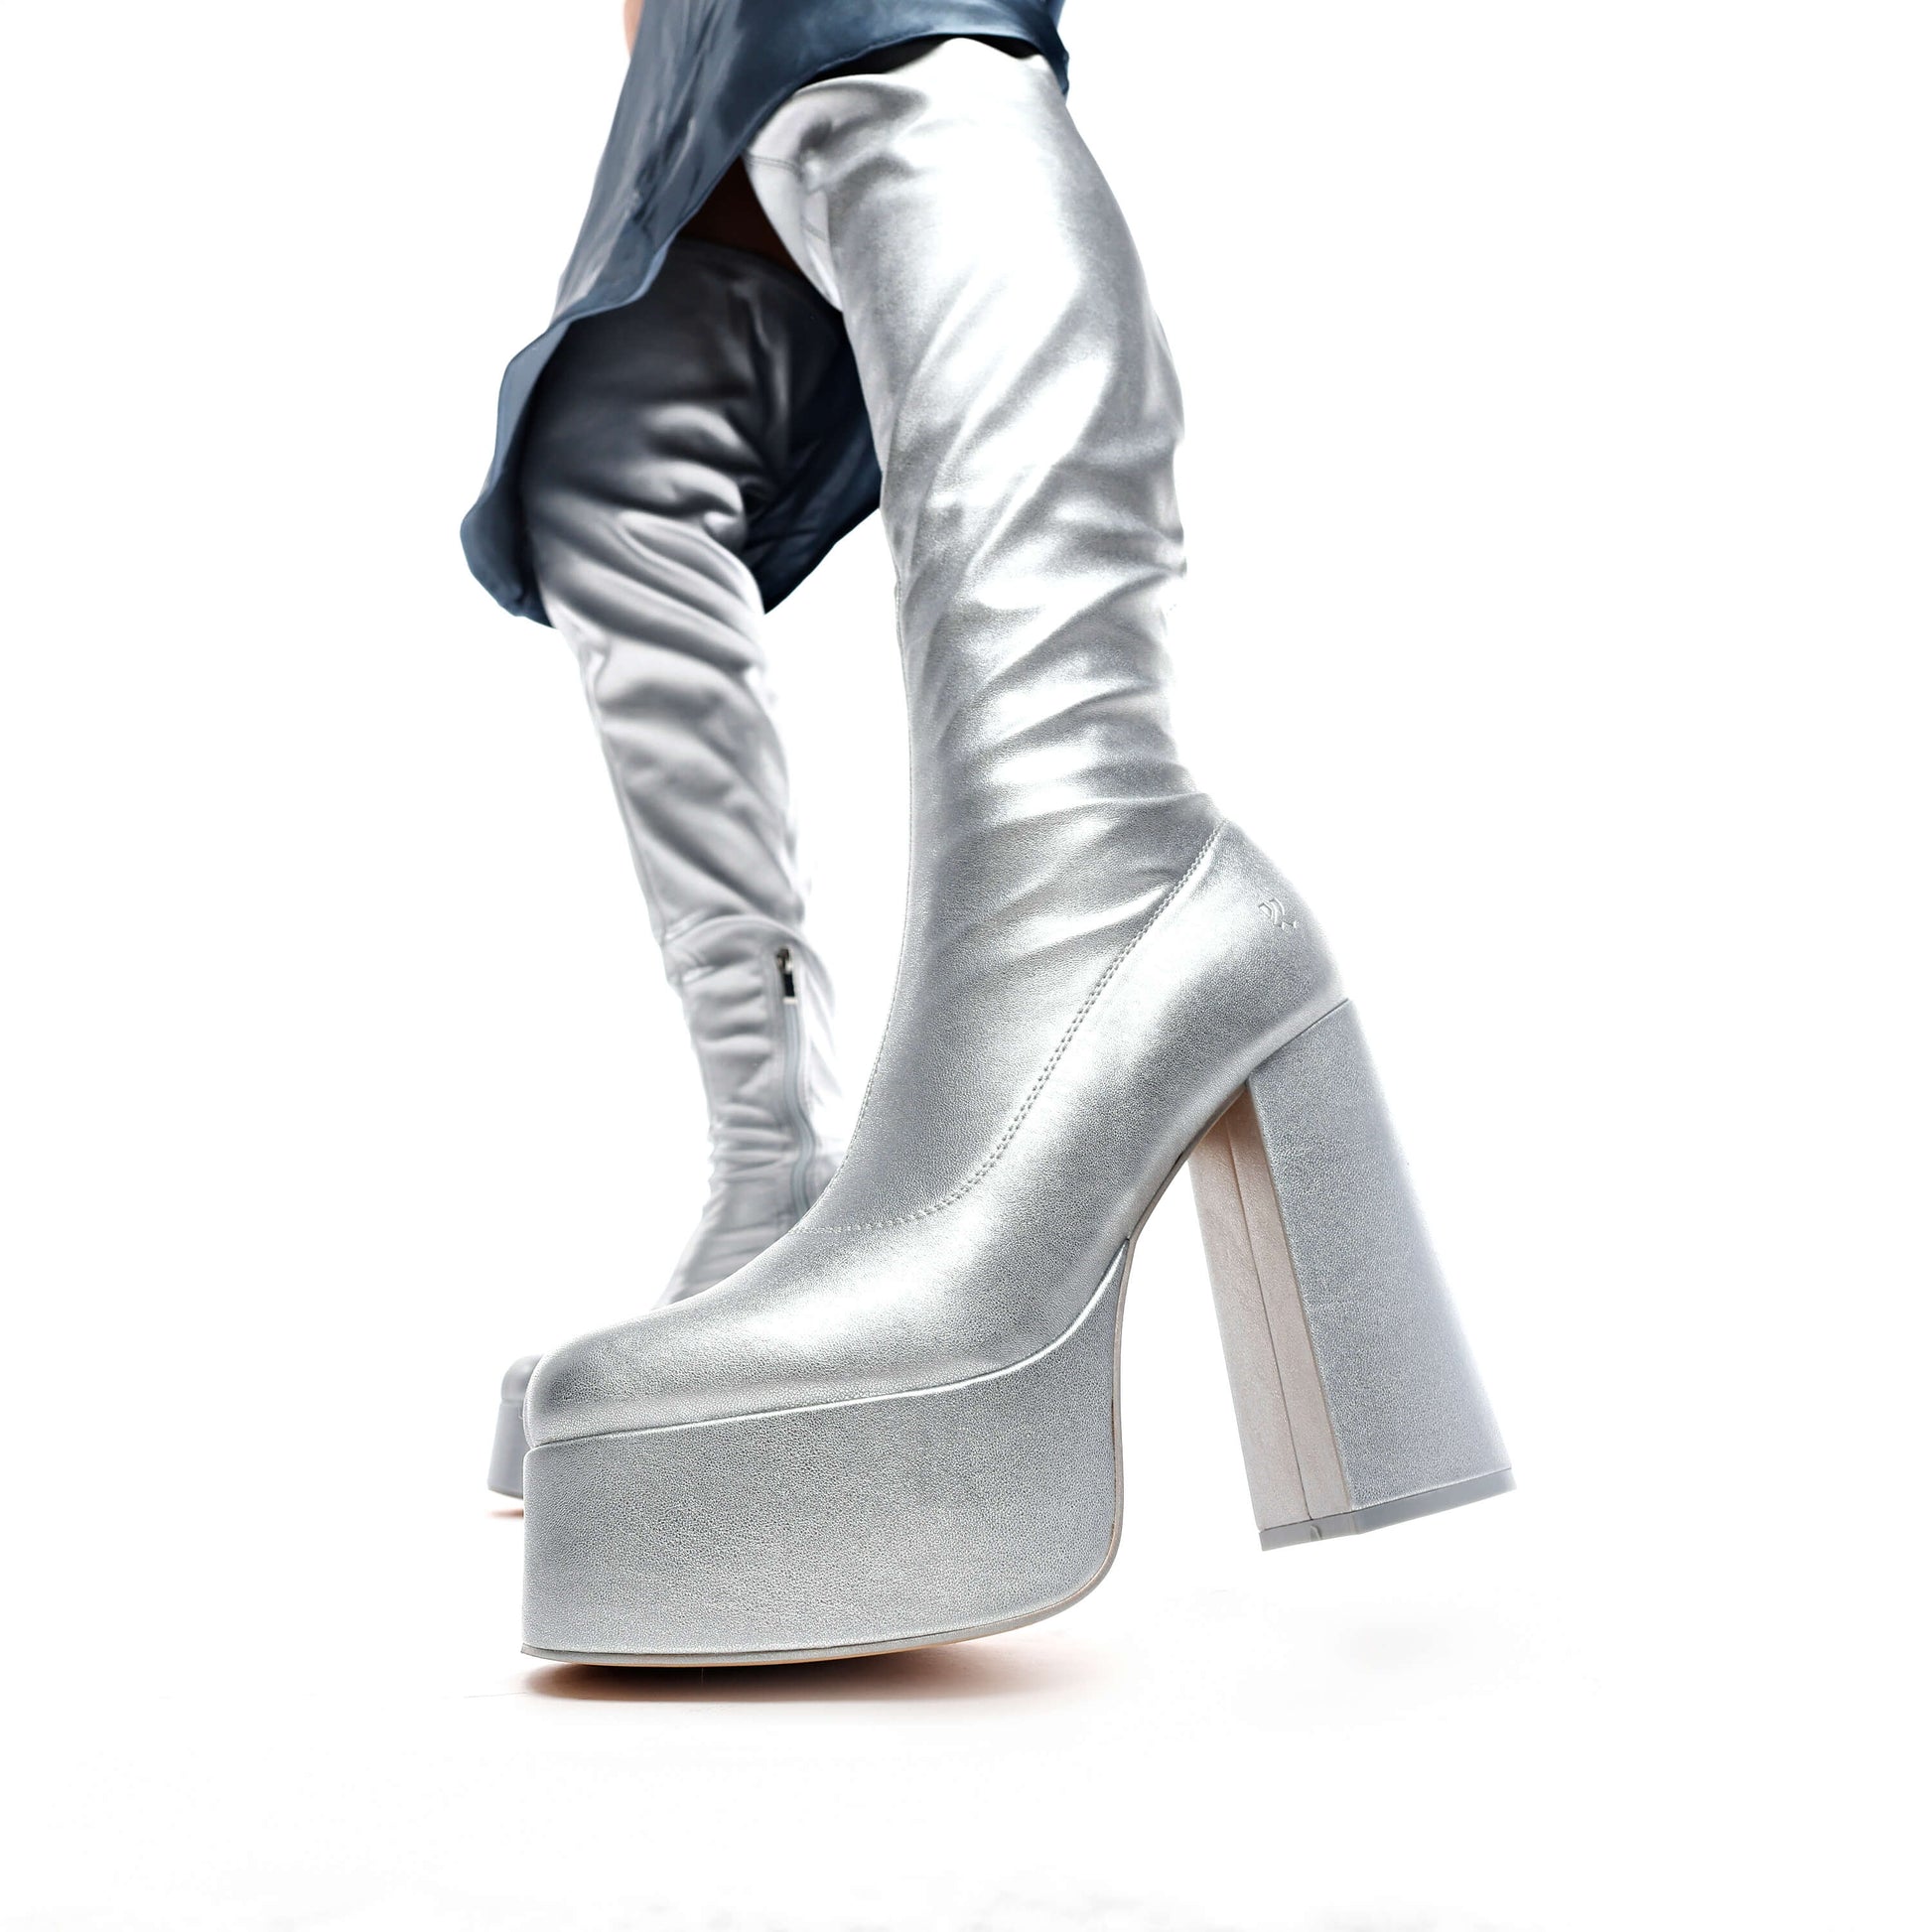 The Redemption Stretch Thigh High Boots - Silver - Long Boots - KOI Footwear - Silver - Model Side View